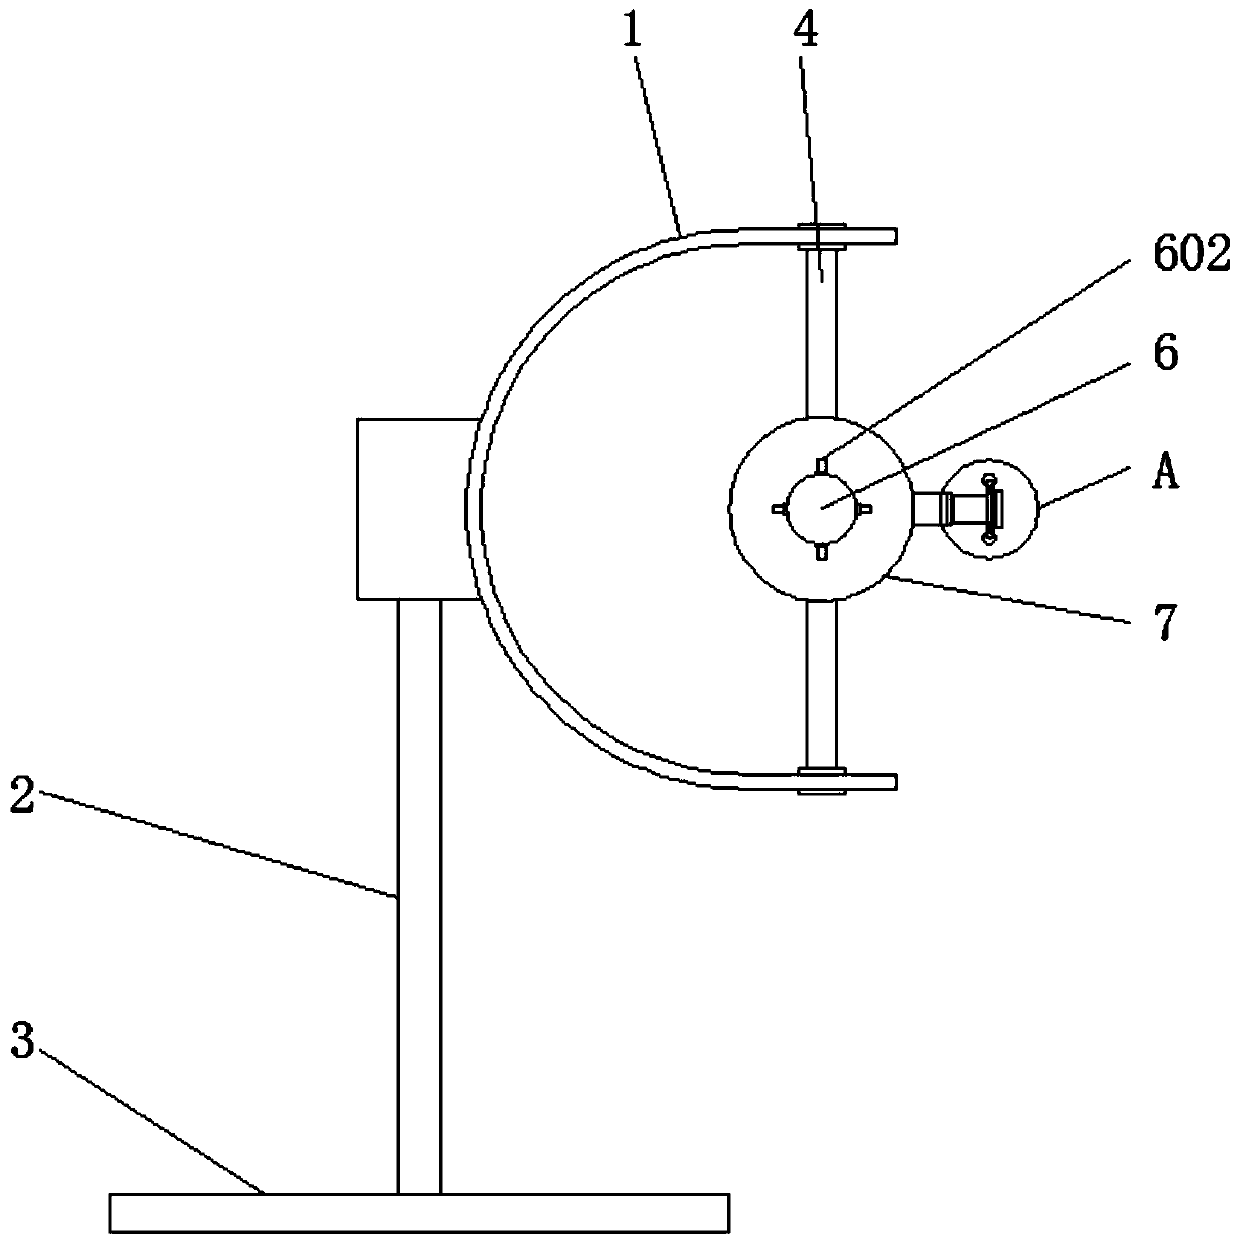 A bearing defect detection device